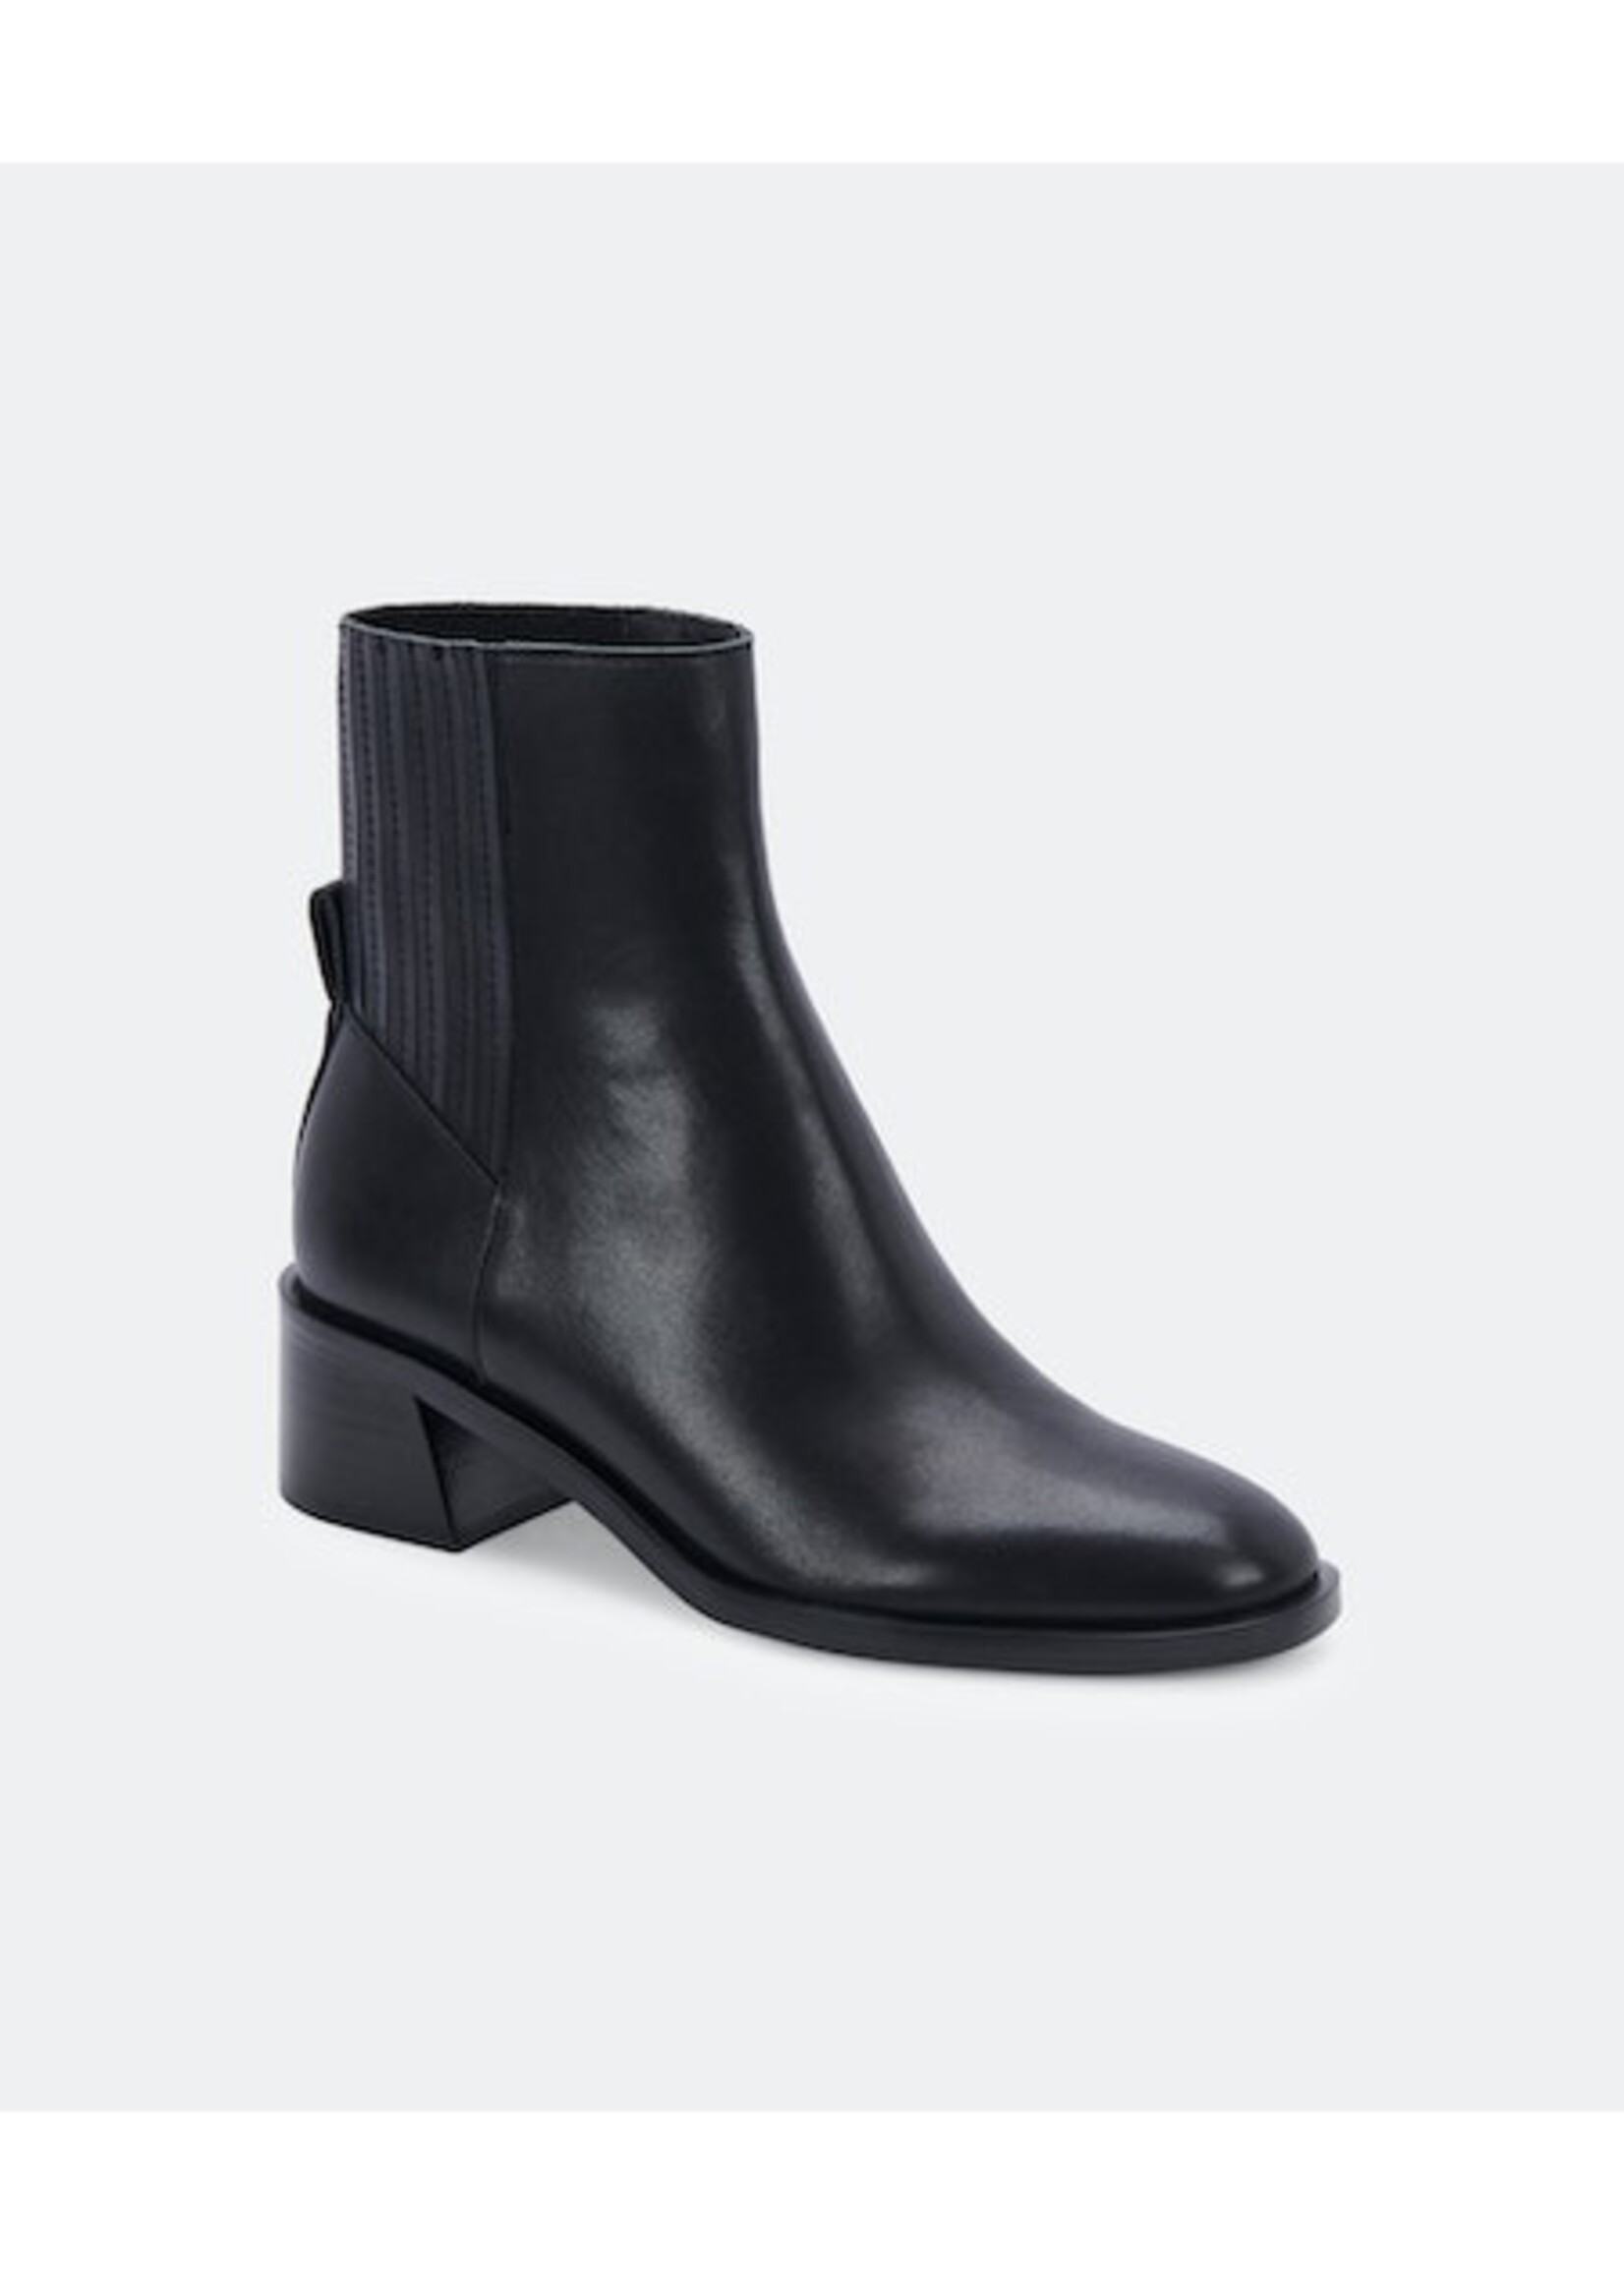 Linny H20 Leather Bootie Black